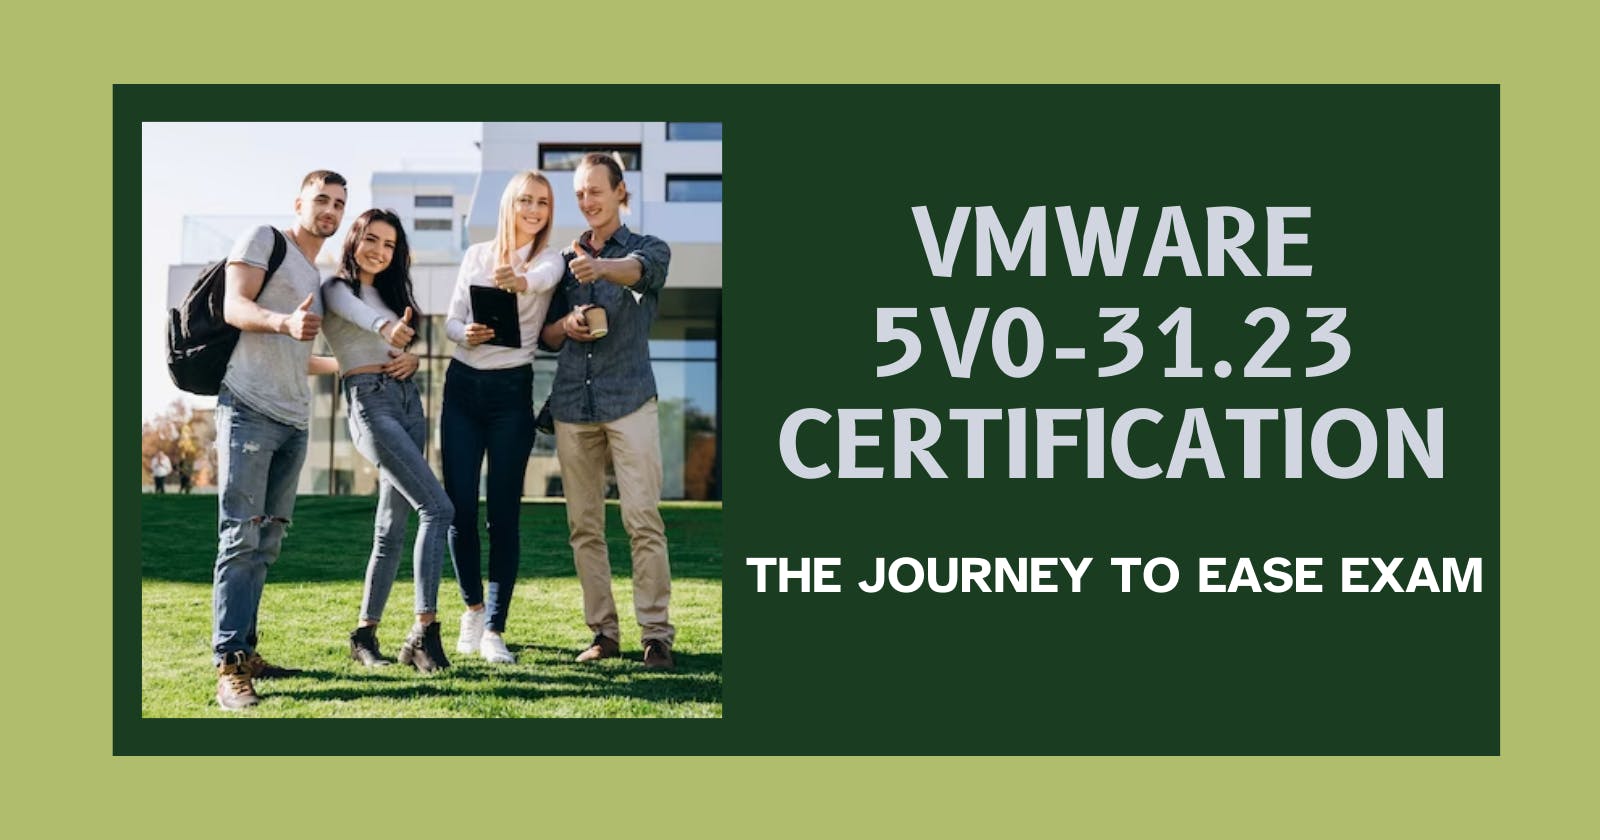 How Do You Get a VMware 5V0-31.23 Certification? Achieve Yours in This Steps